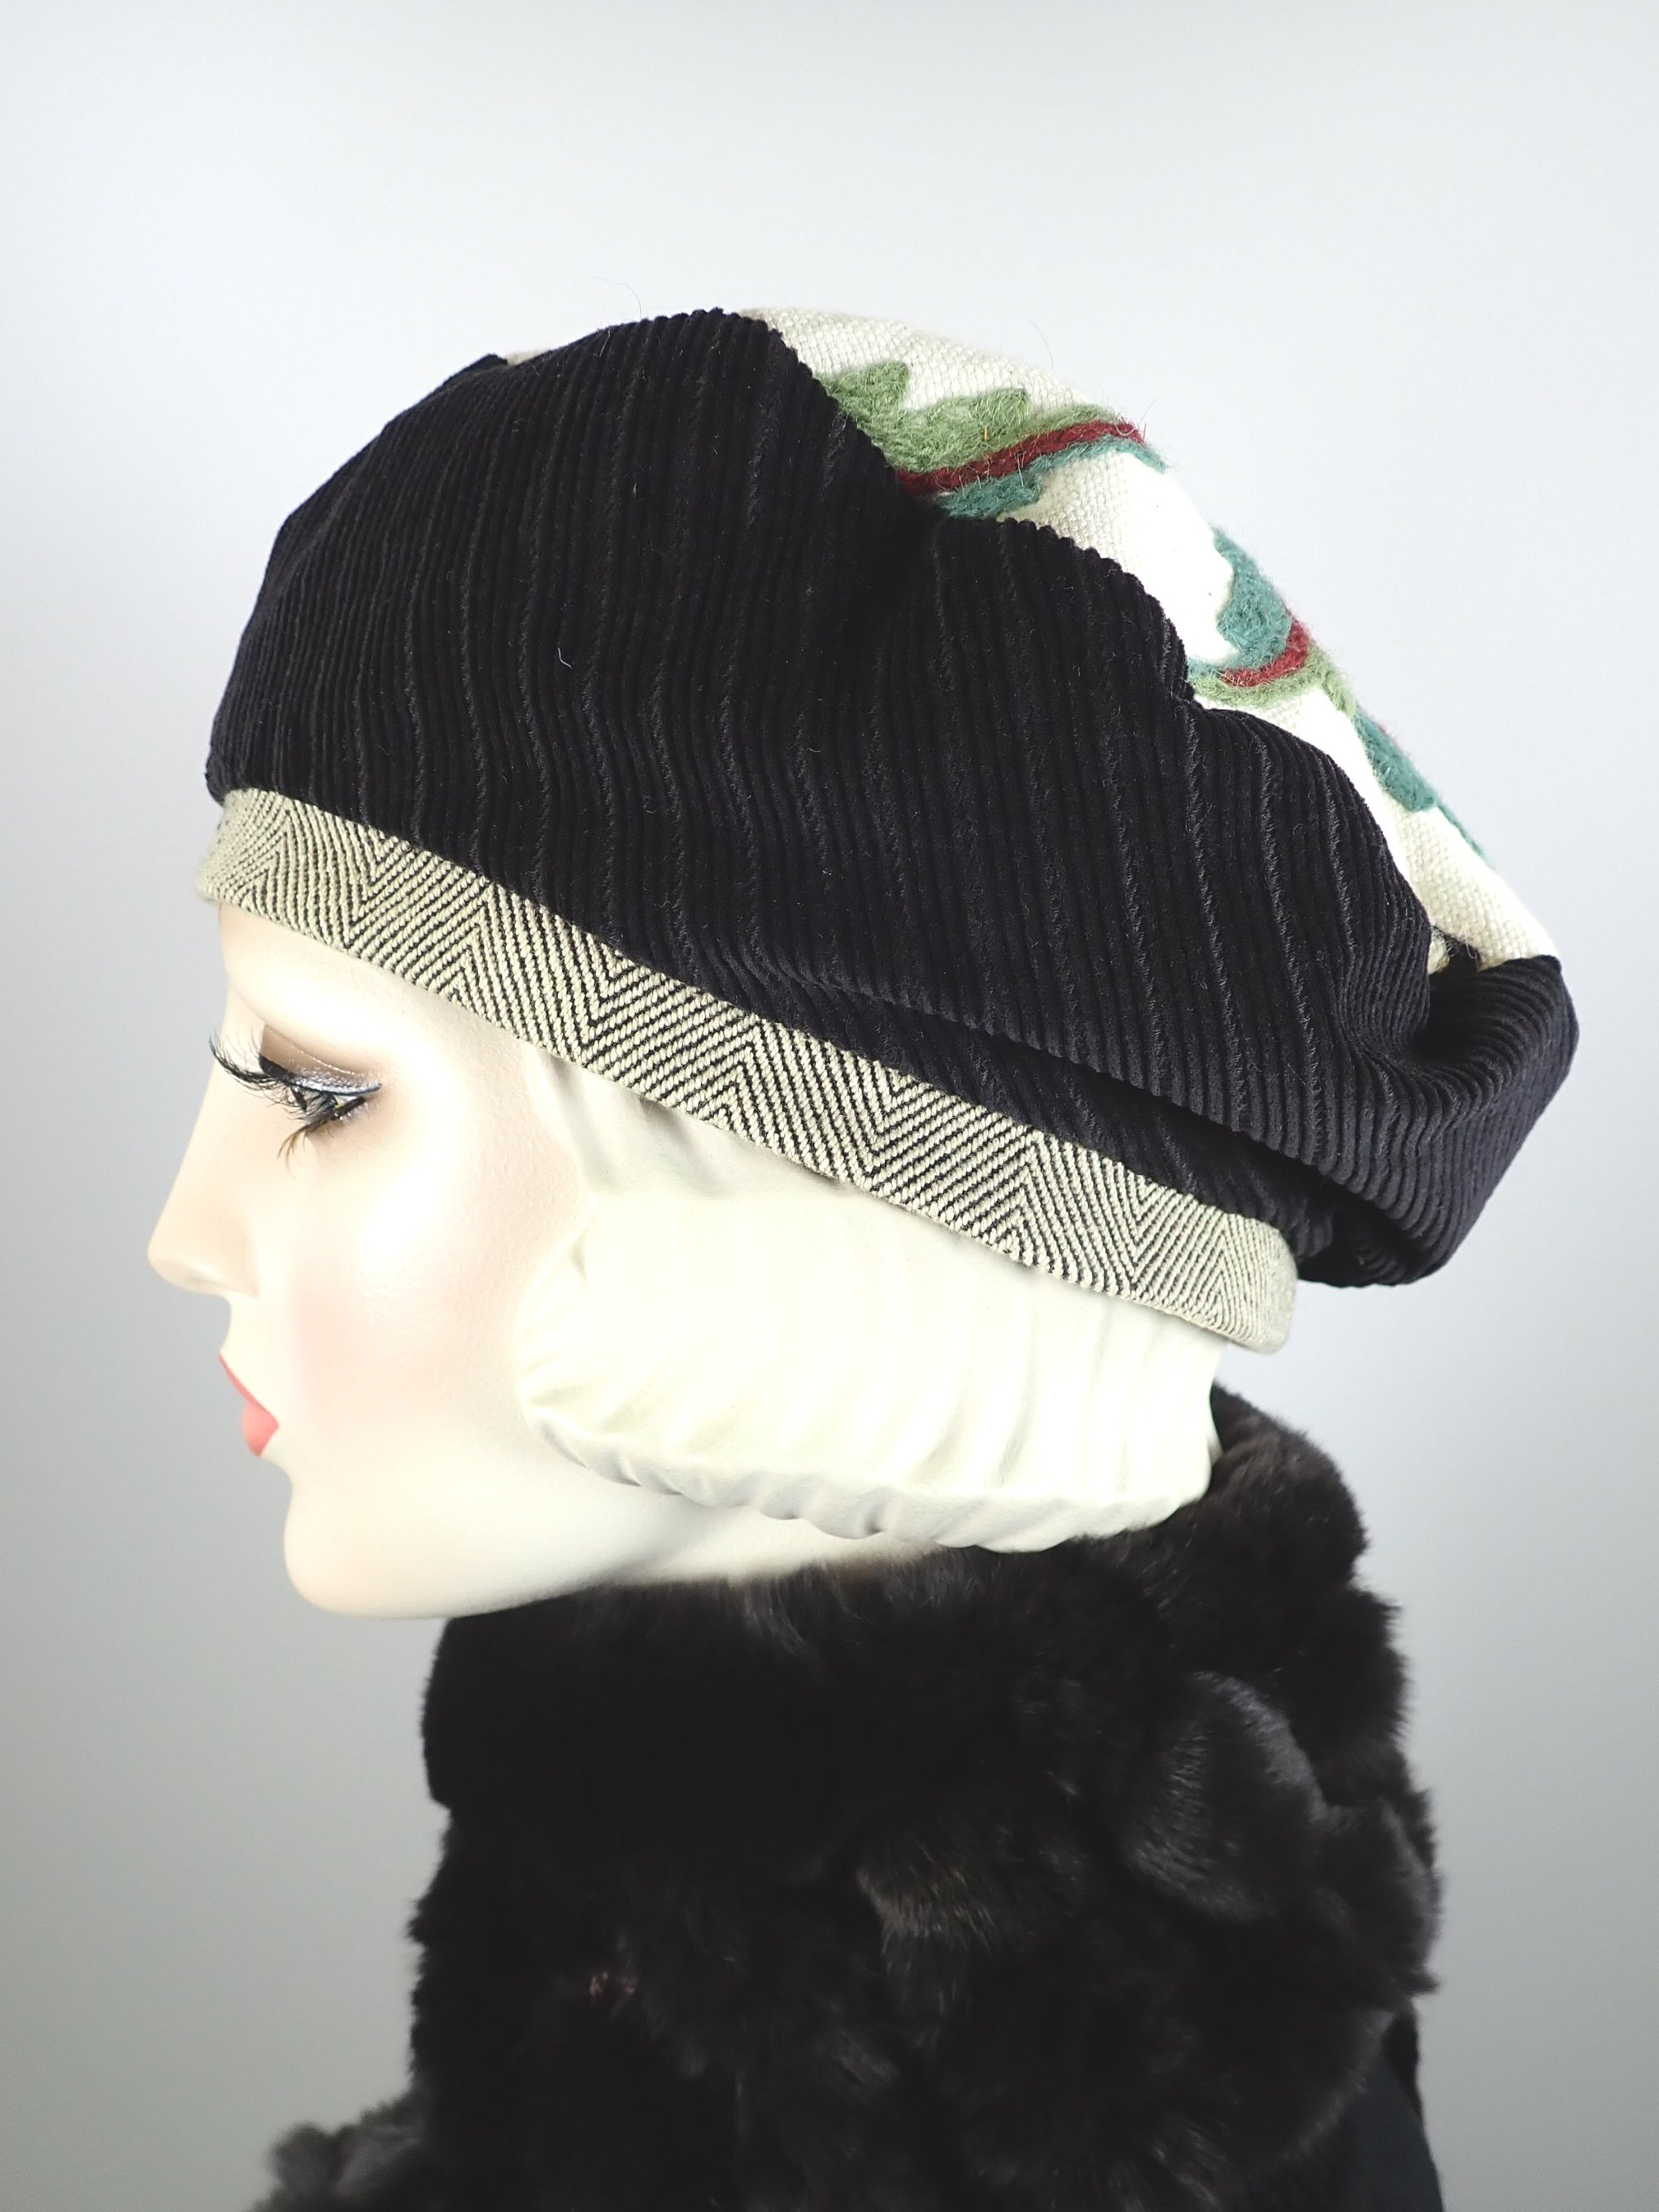 Winter Corduroy and Tapestry Beret Fall Winter Tam Hat for Women - What a Great Hat